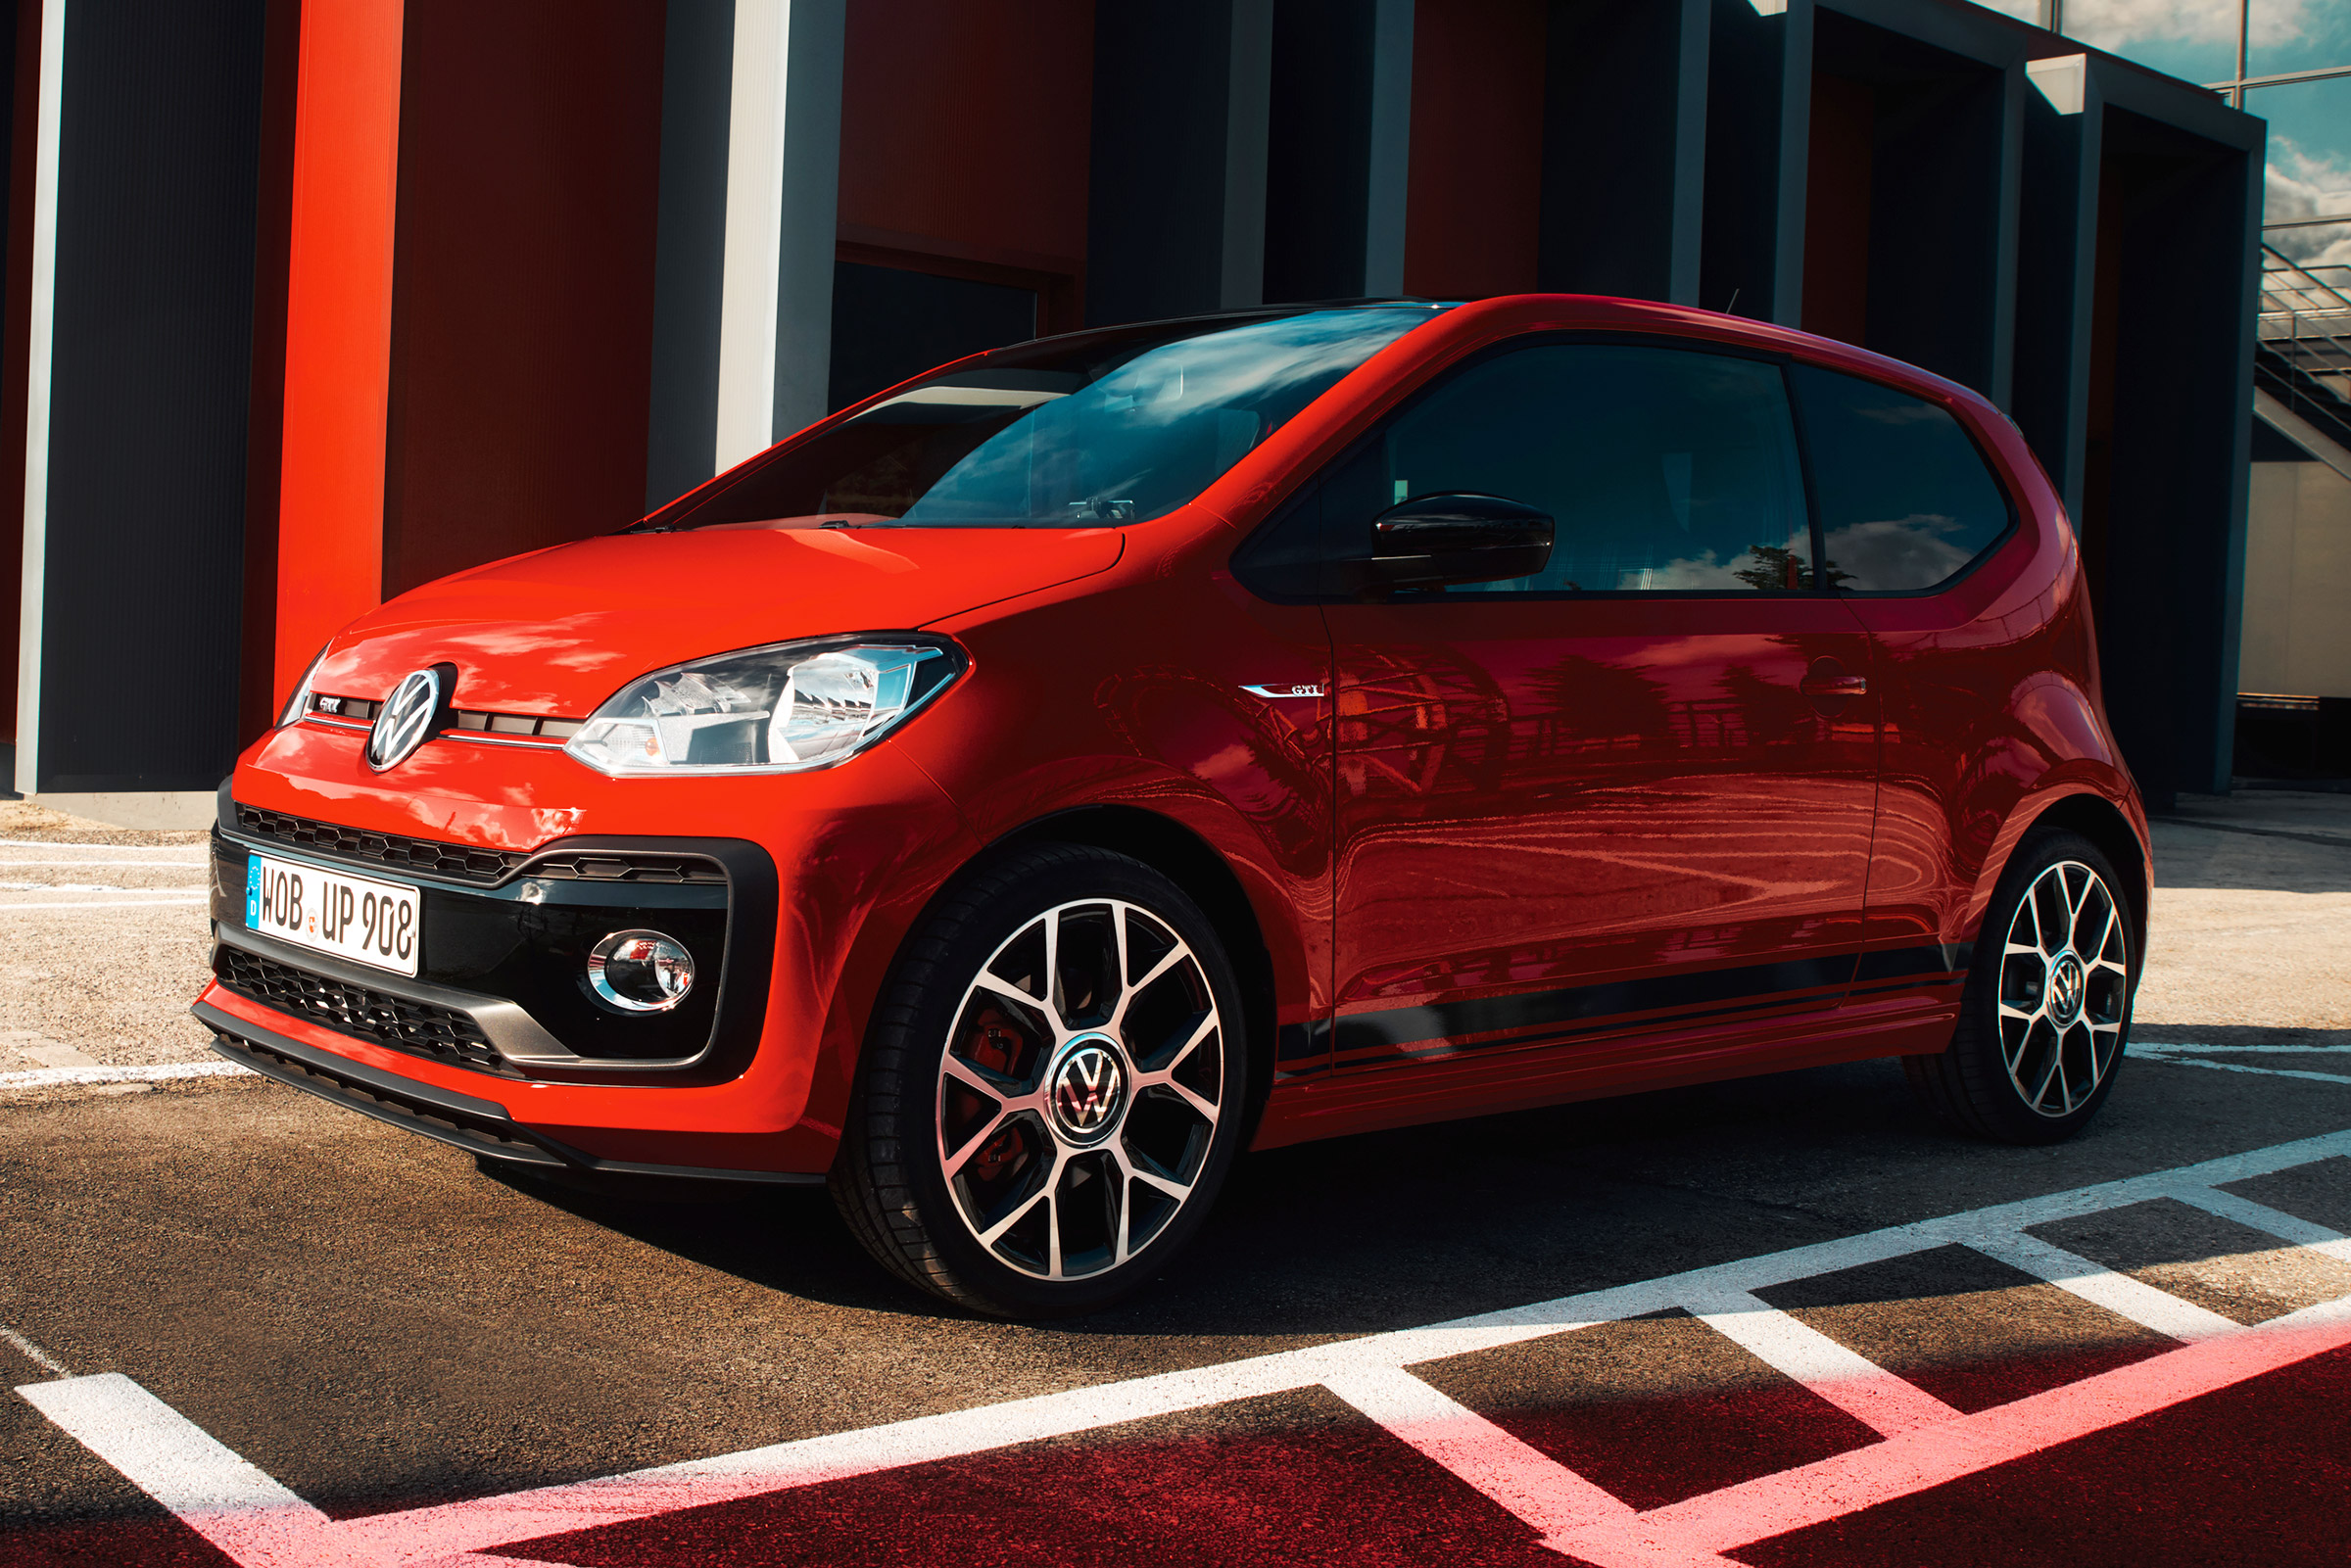 Rejoice, the VW up! GTI is back in the UK | Auto Express